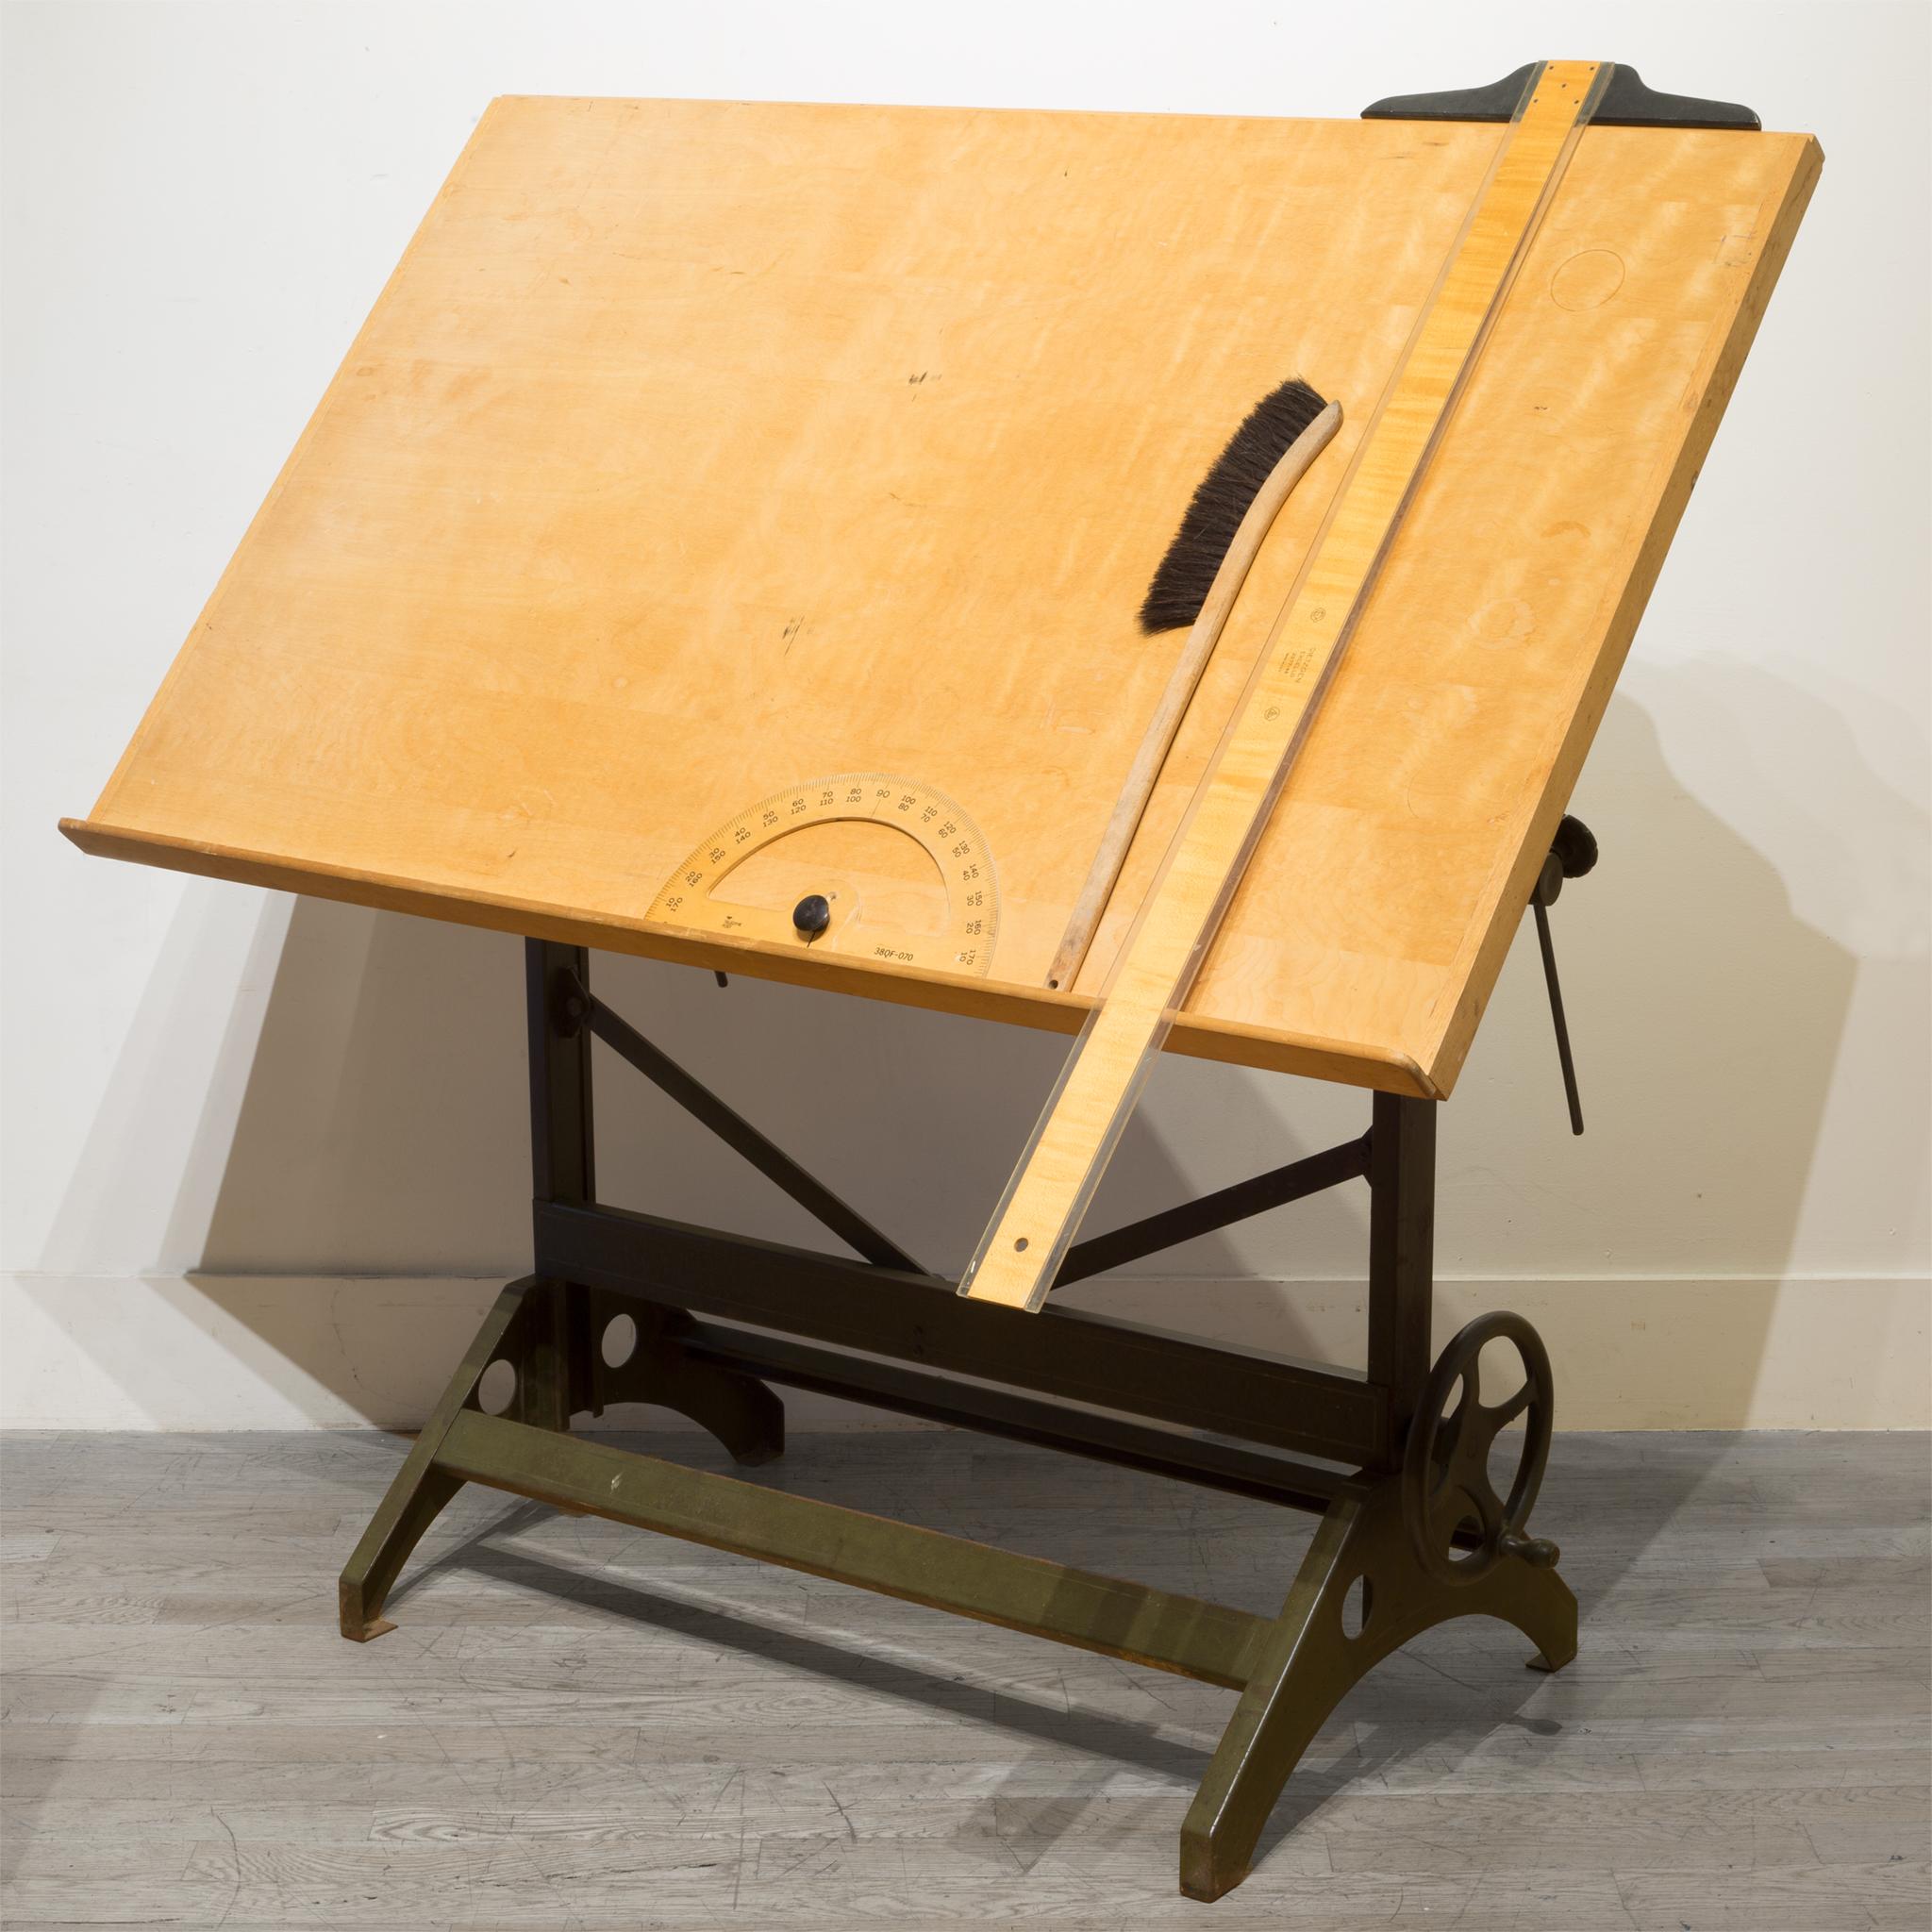 About

This is an industrial steel drafting table with the original wooden top and large handle on the side. The table is an Army green with gold stripes. The angle of the top and the height are both adjustable for use as a dining table or as a